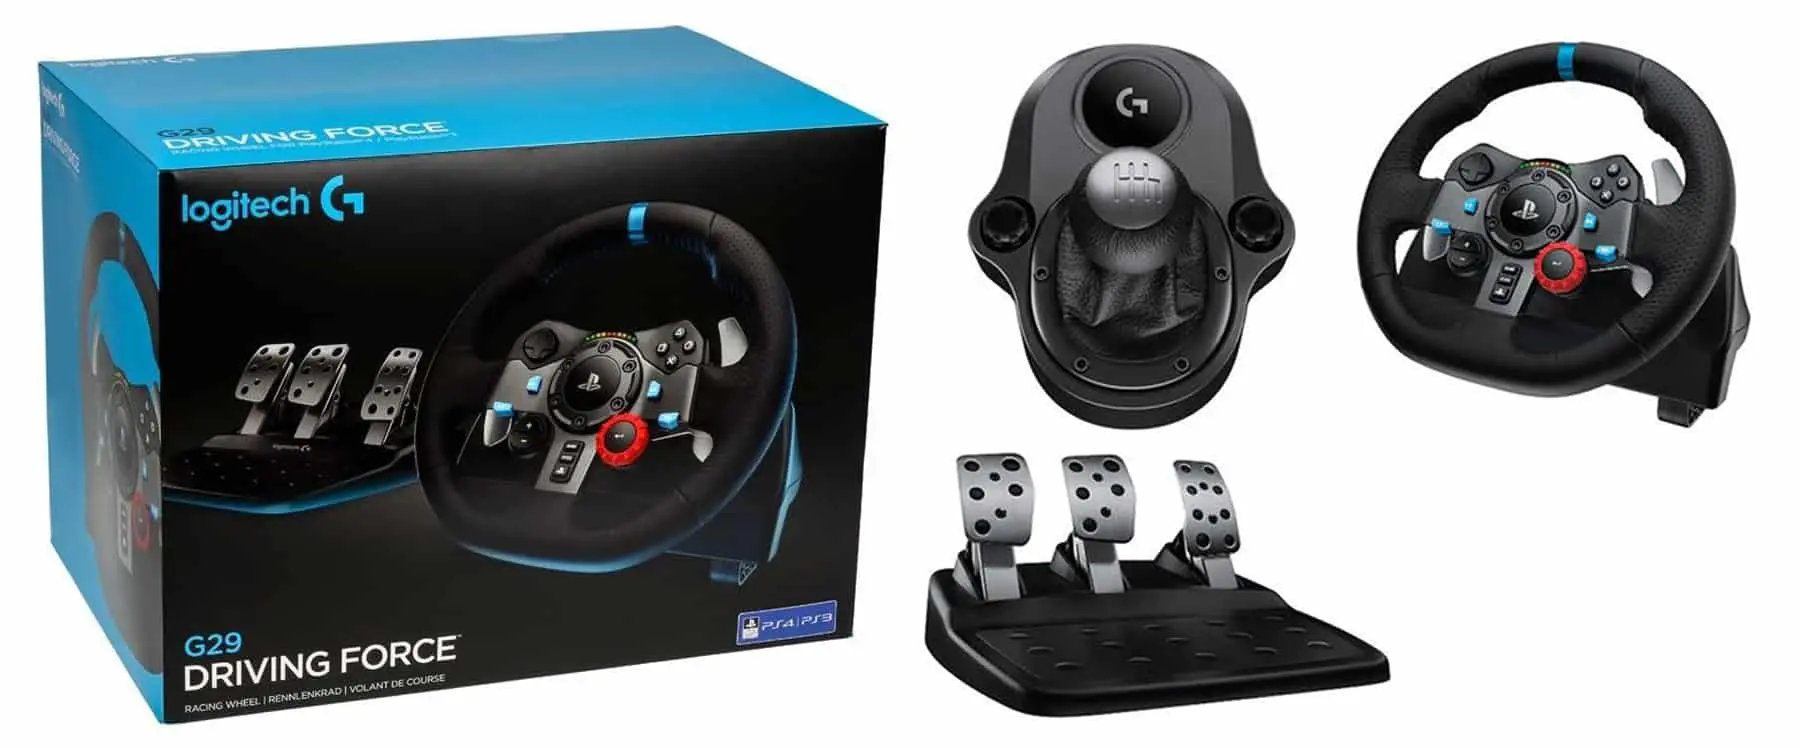 The Logitech G29 Racing Wheel Review: Is it Still Worth Buying?